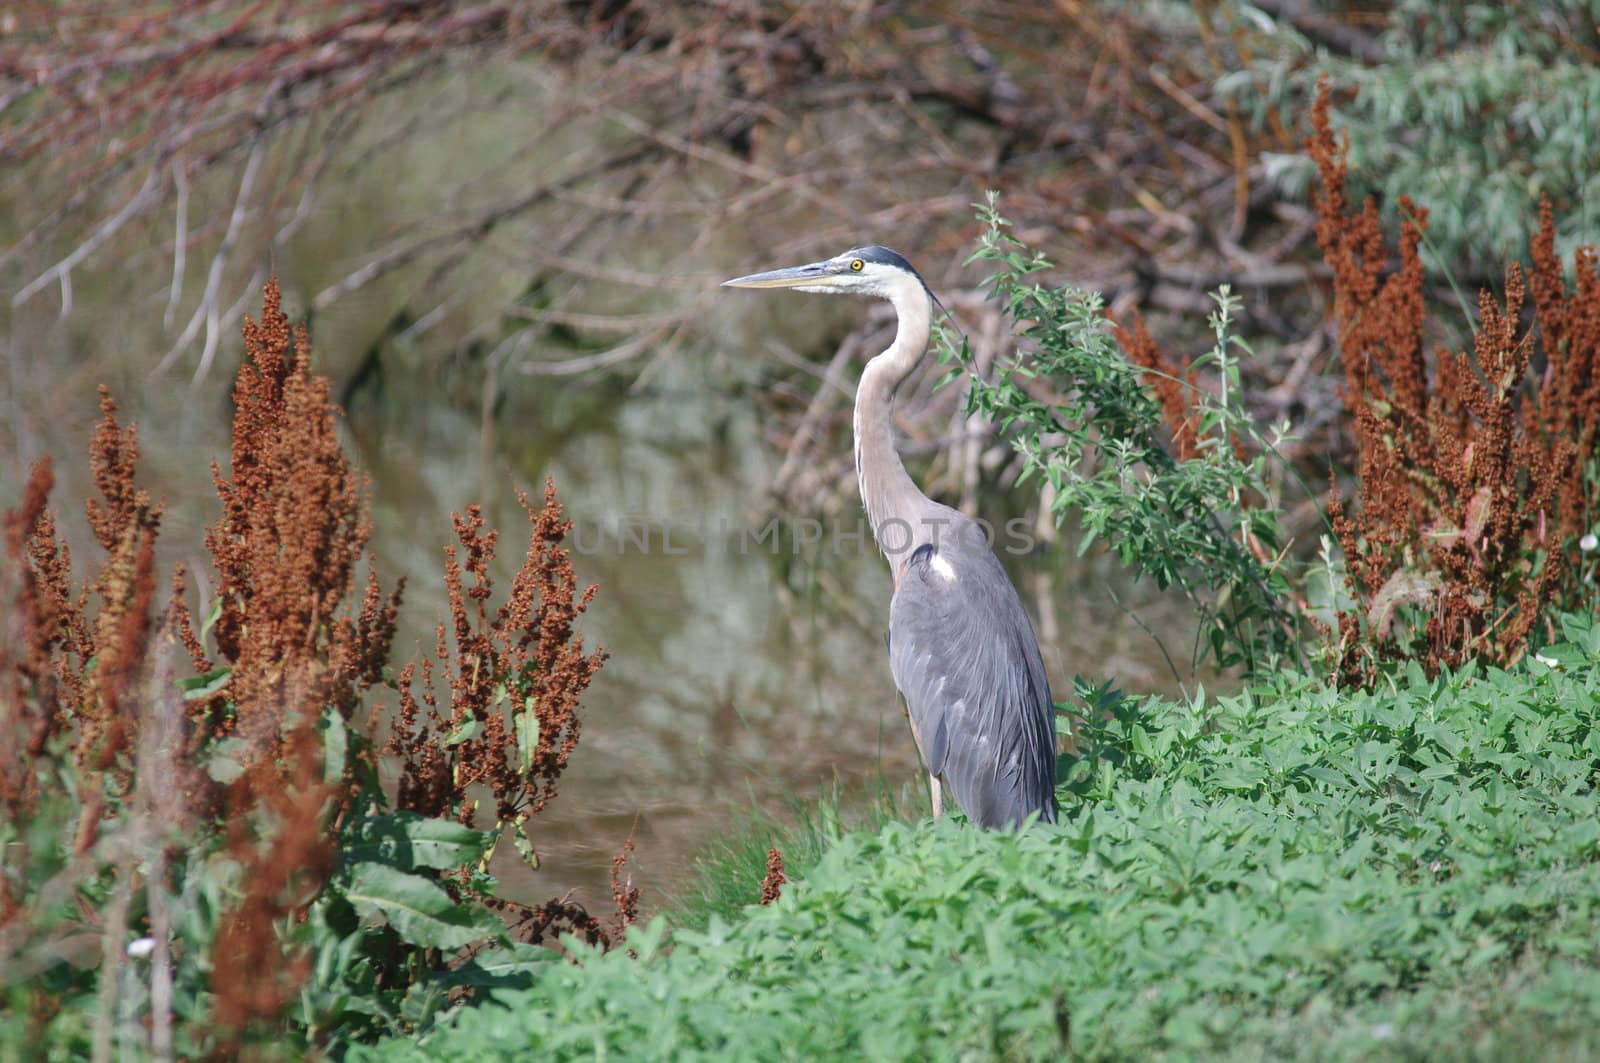 A gray heron standing alert next to a pond in Colorado